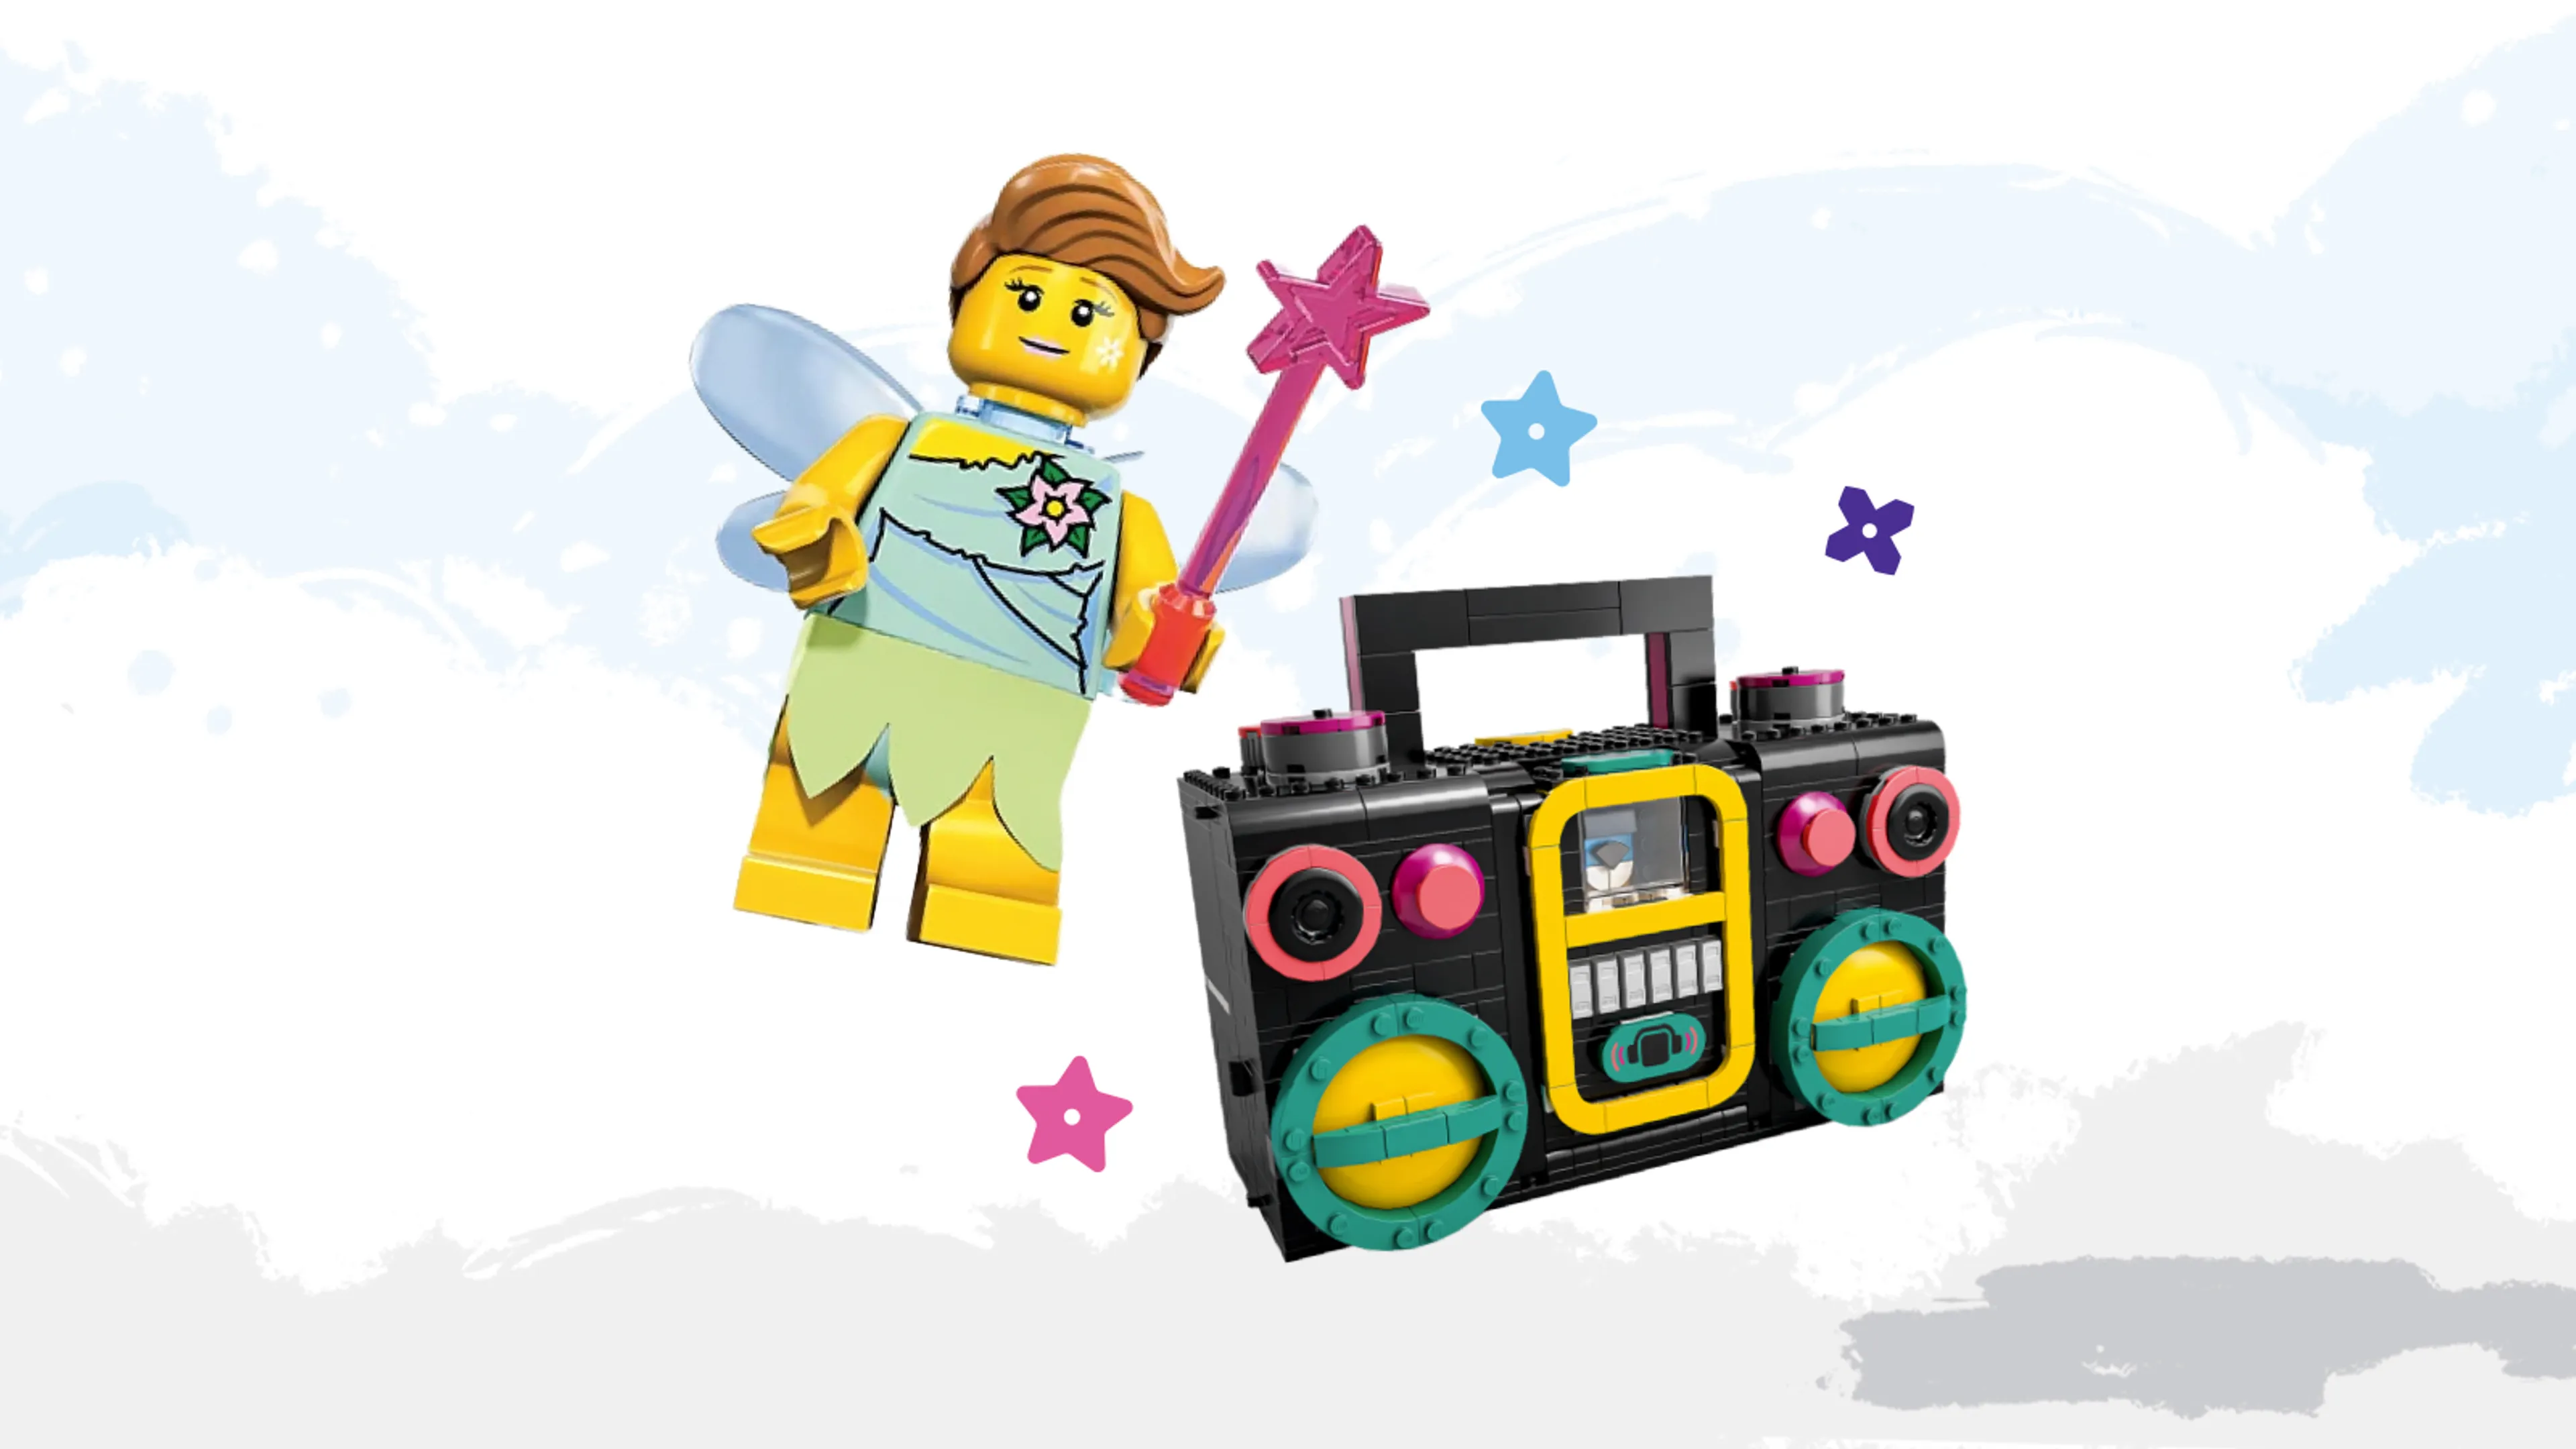 A fairy minifigure and a boombox